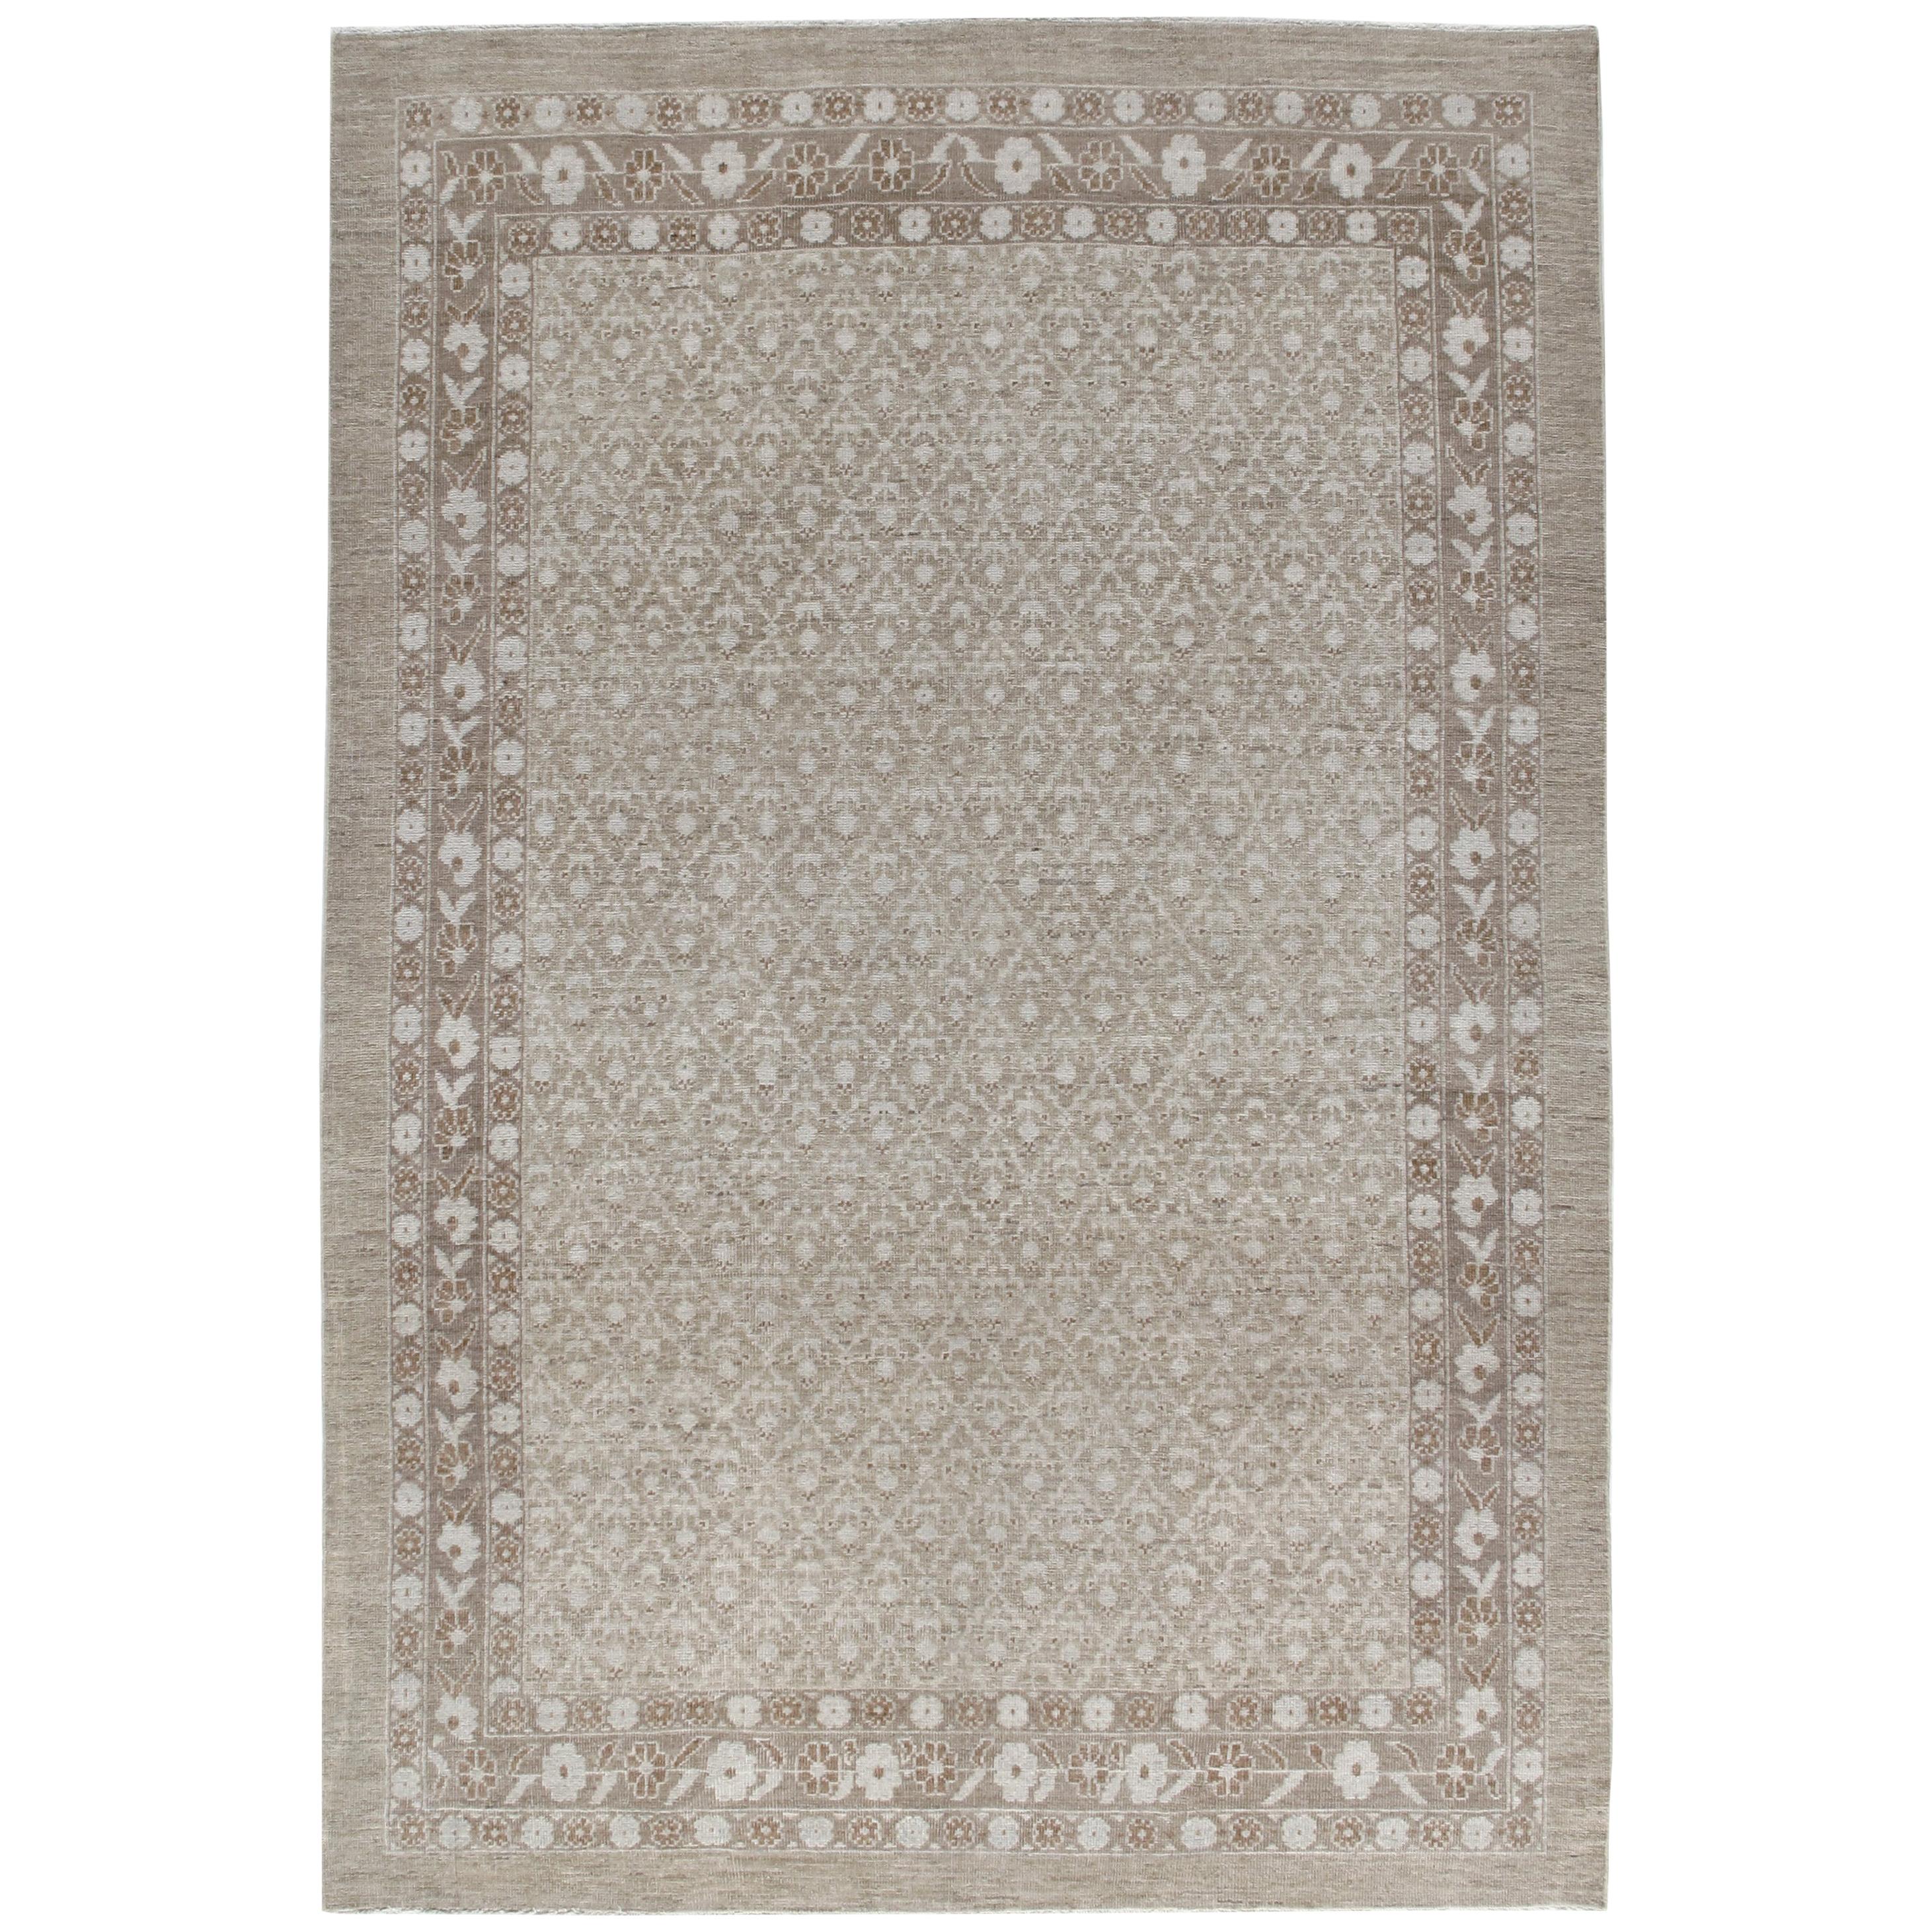 Persian Serab Decorative Handknotted Rug in Camel and Beige Color For Sale